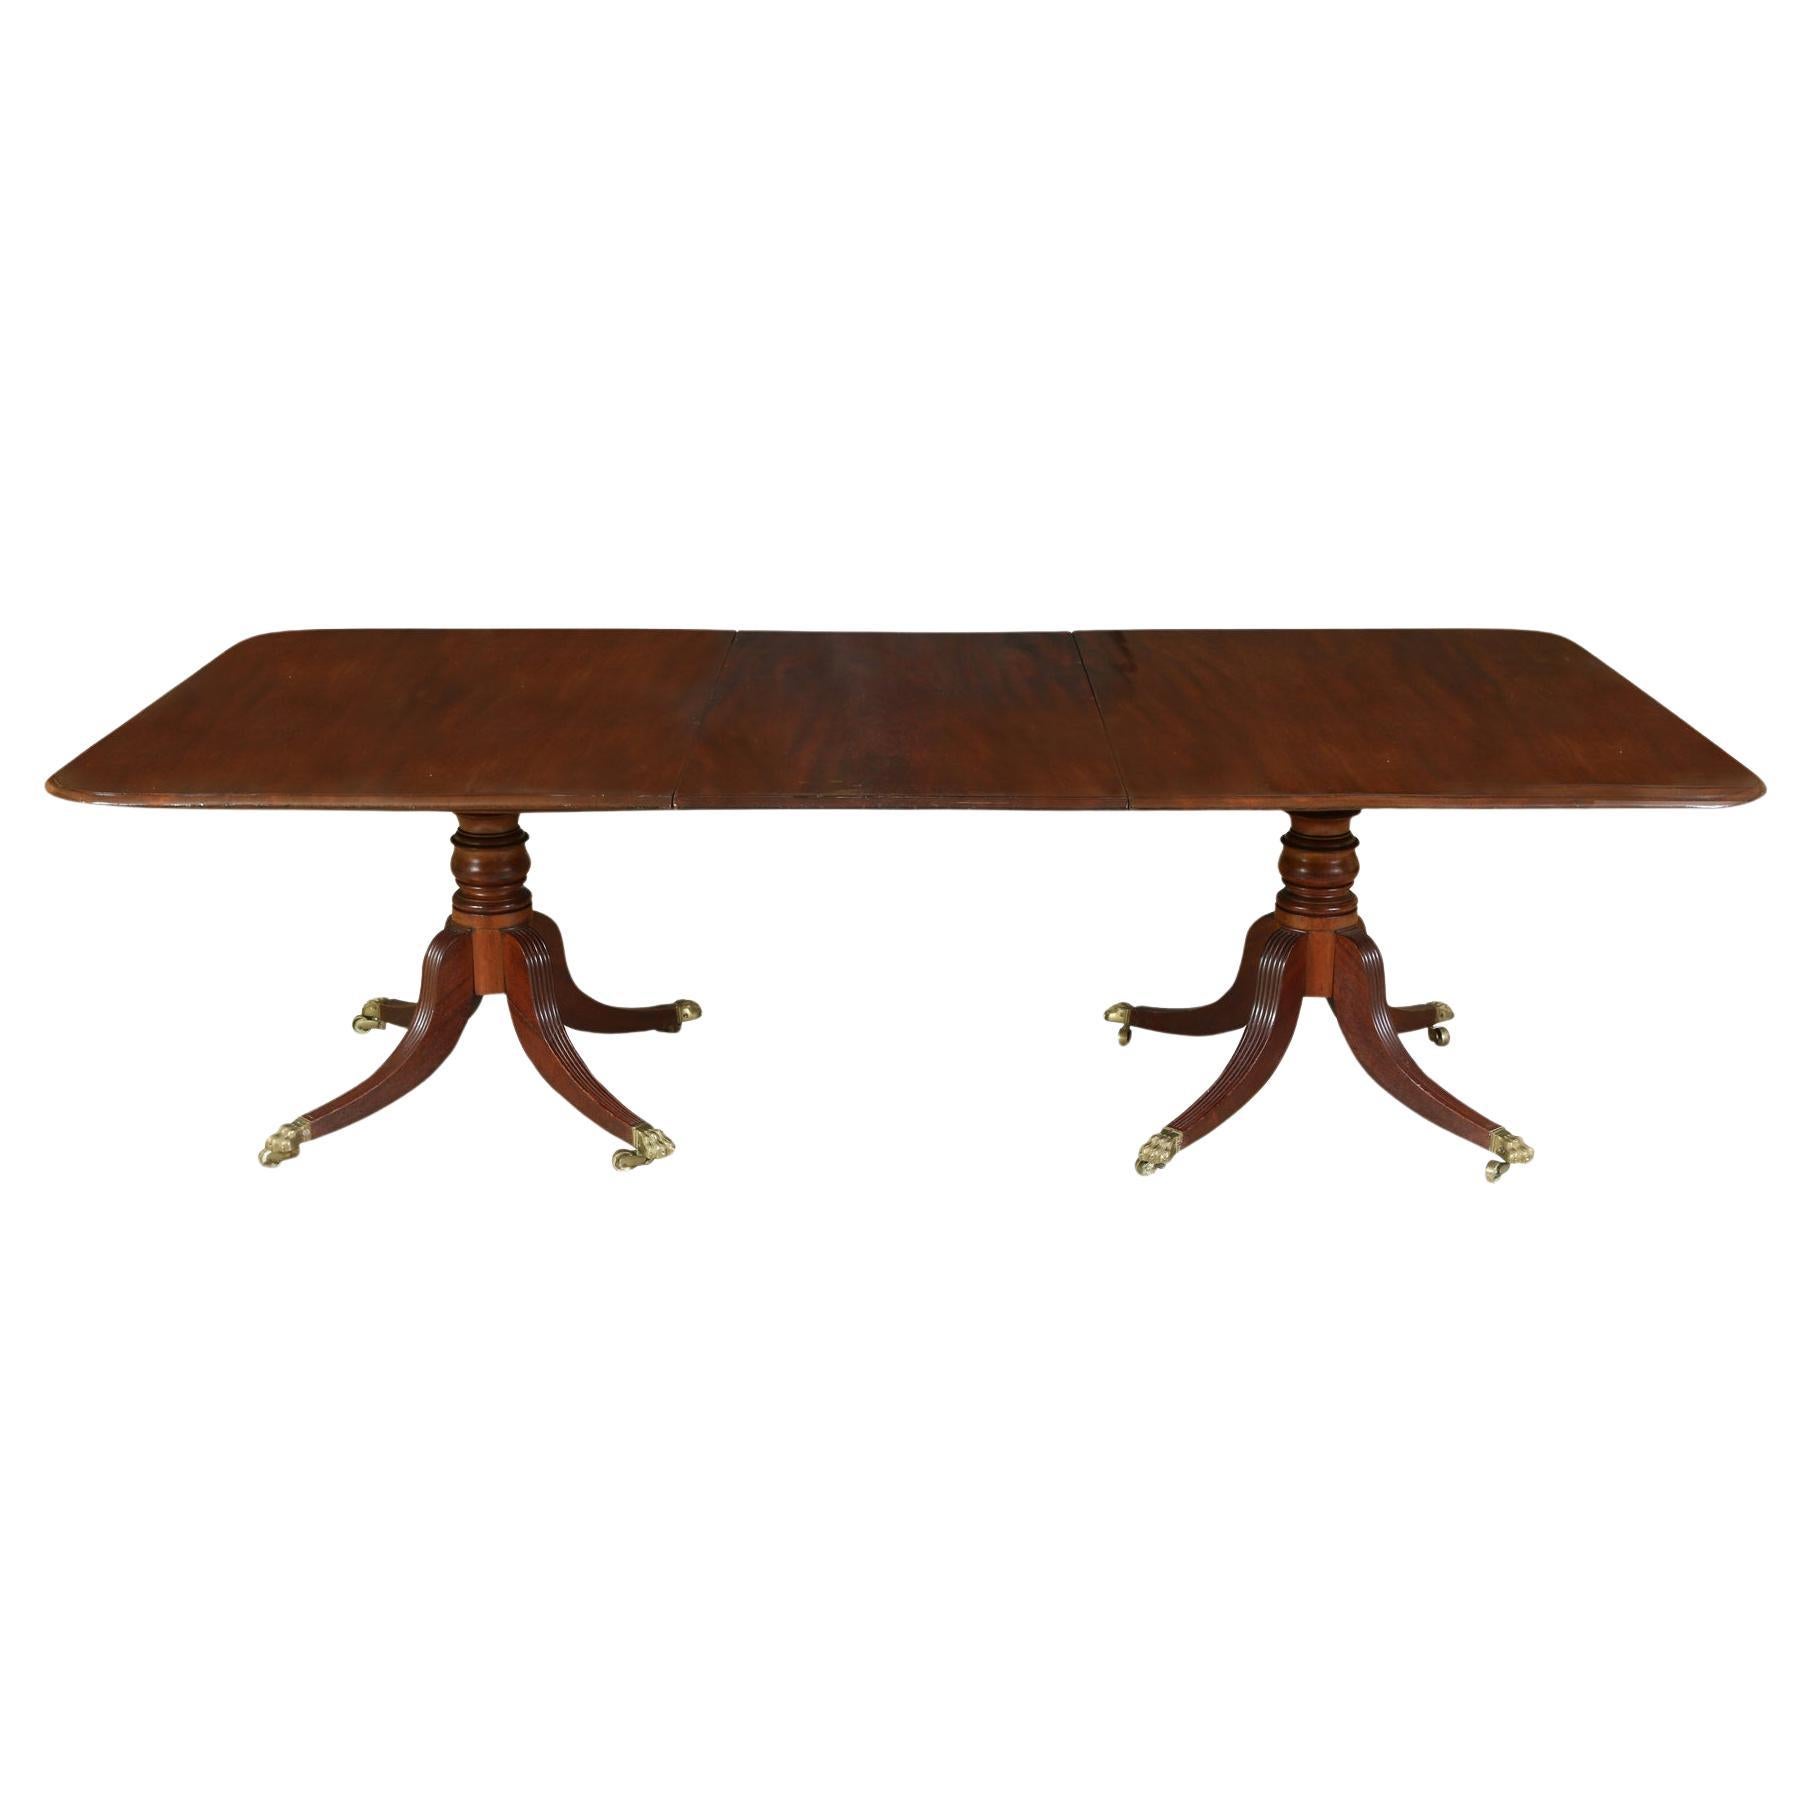 Double Pedestal Polished Mahogany Dining Table With Multiple Leaves For Sale